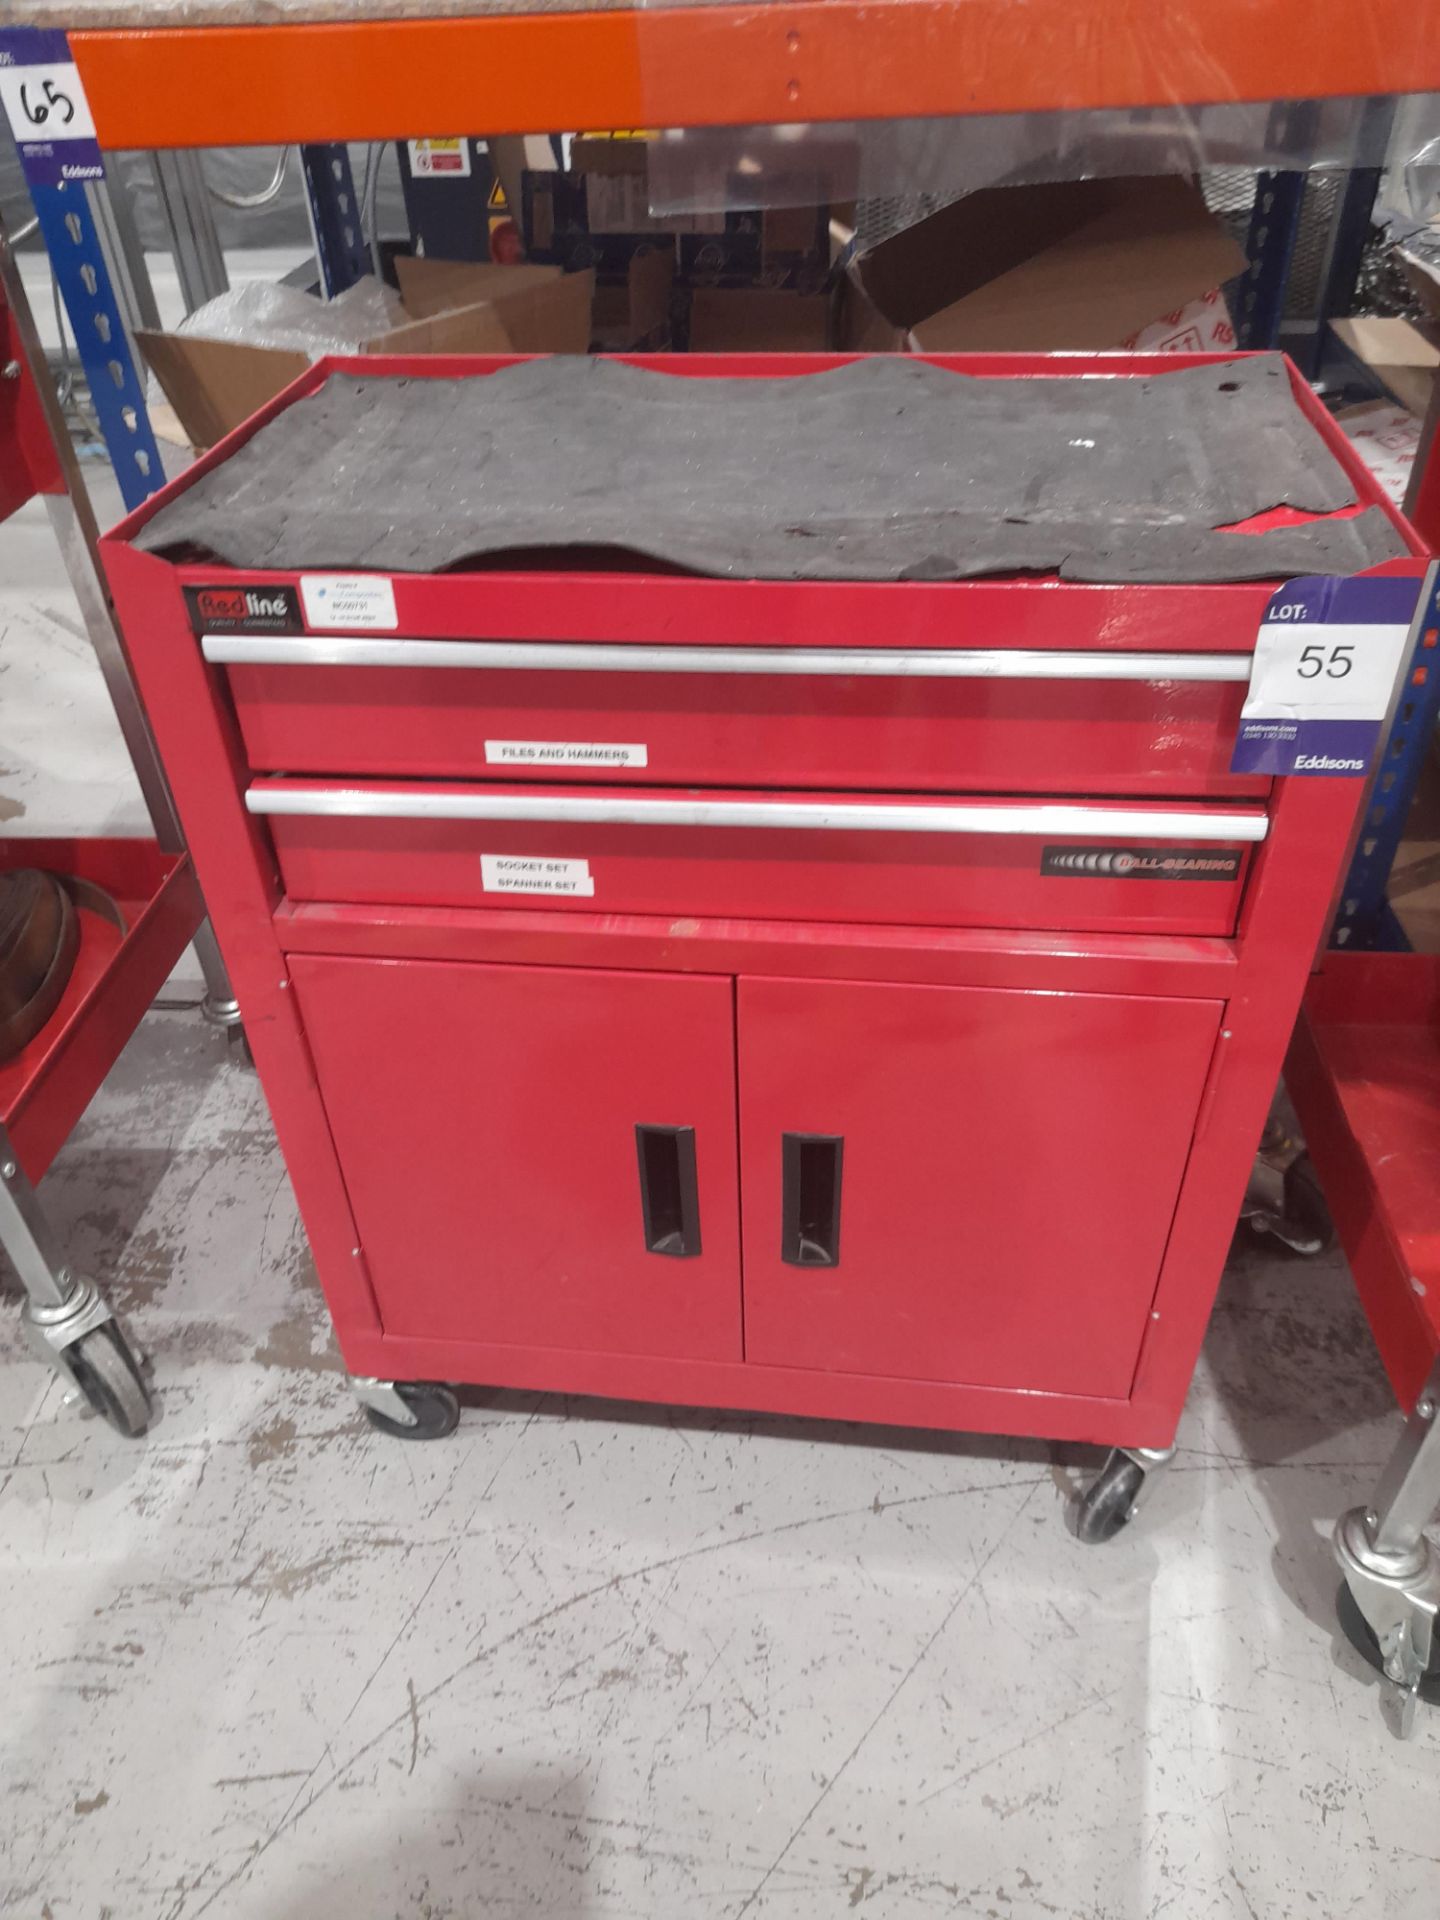 Redline double door, two drawer mobile tool chest, with contents